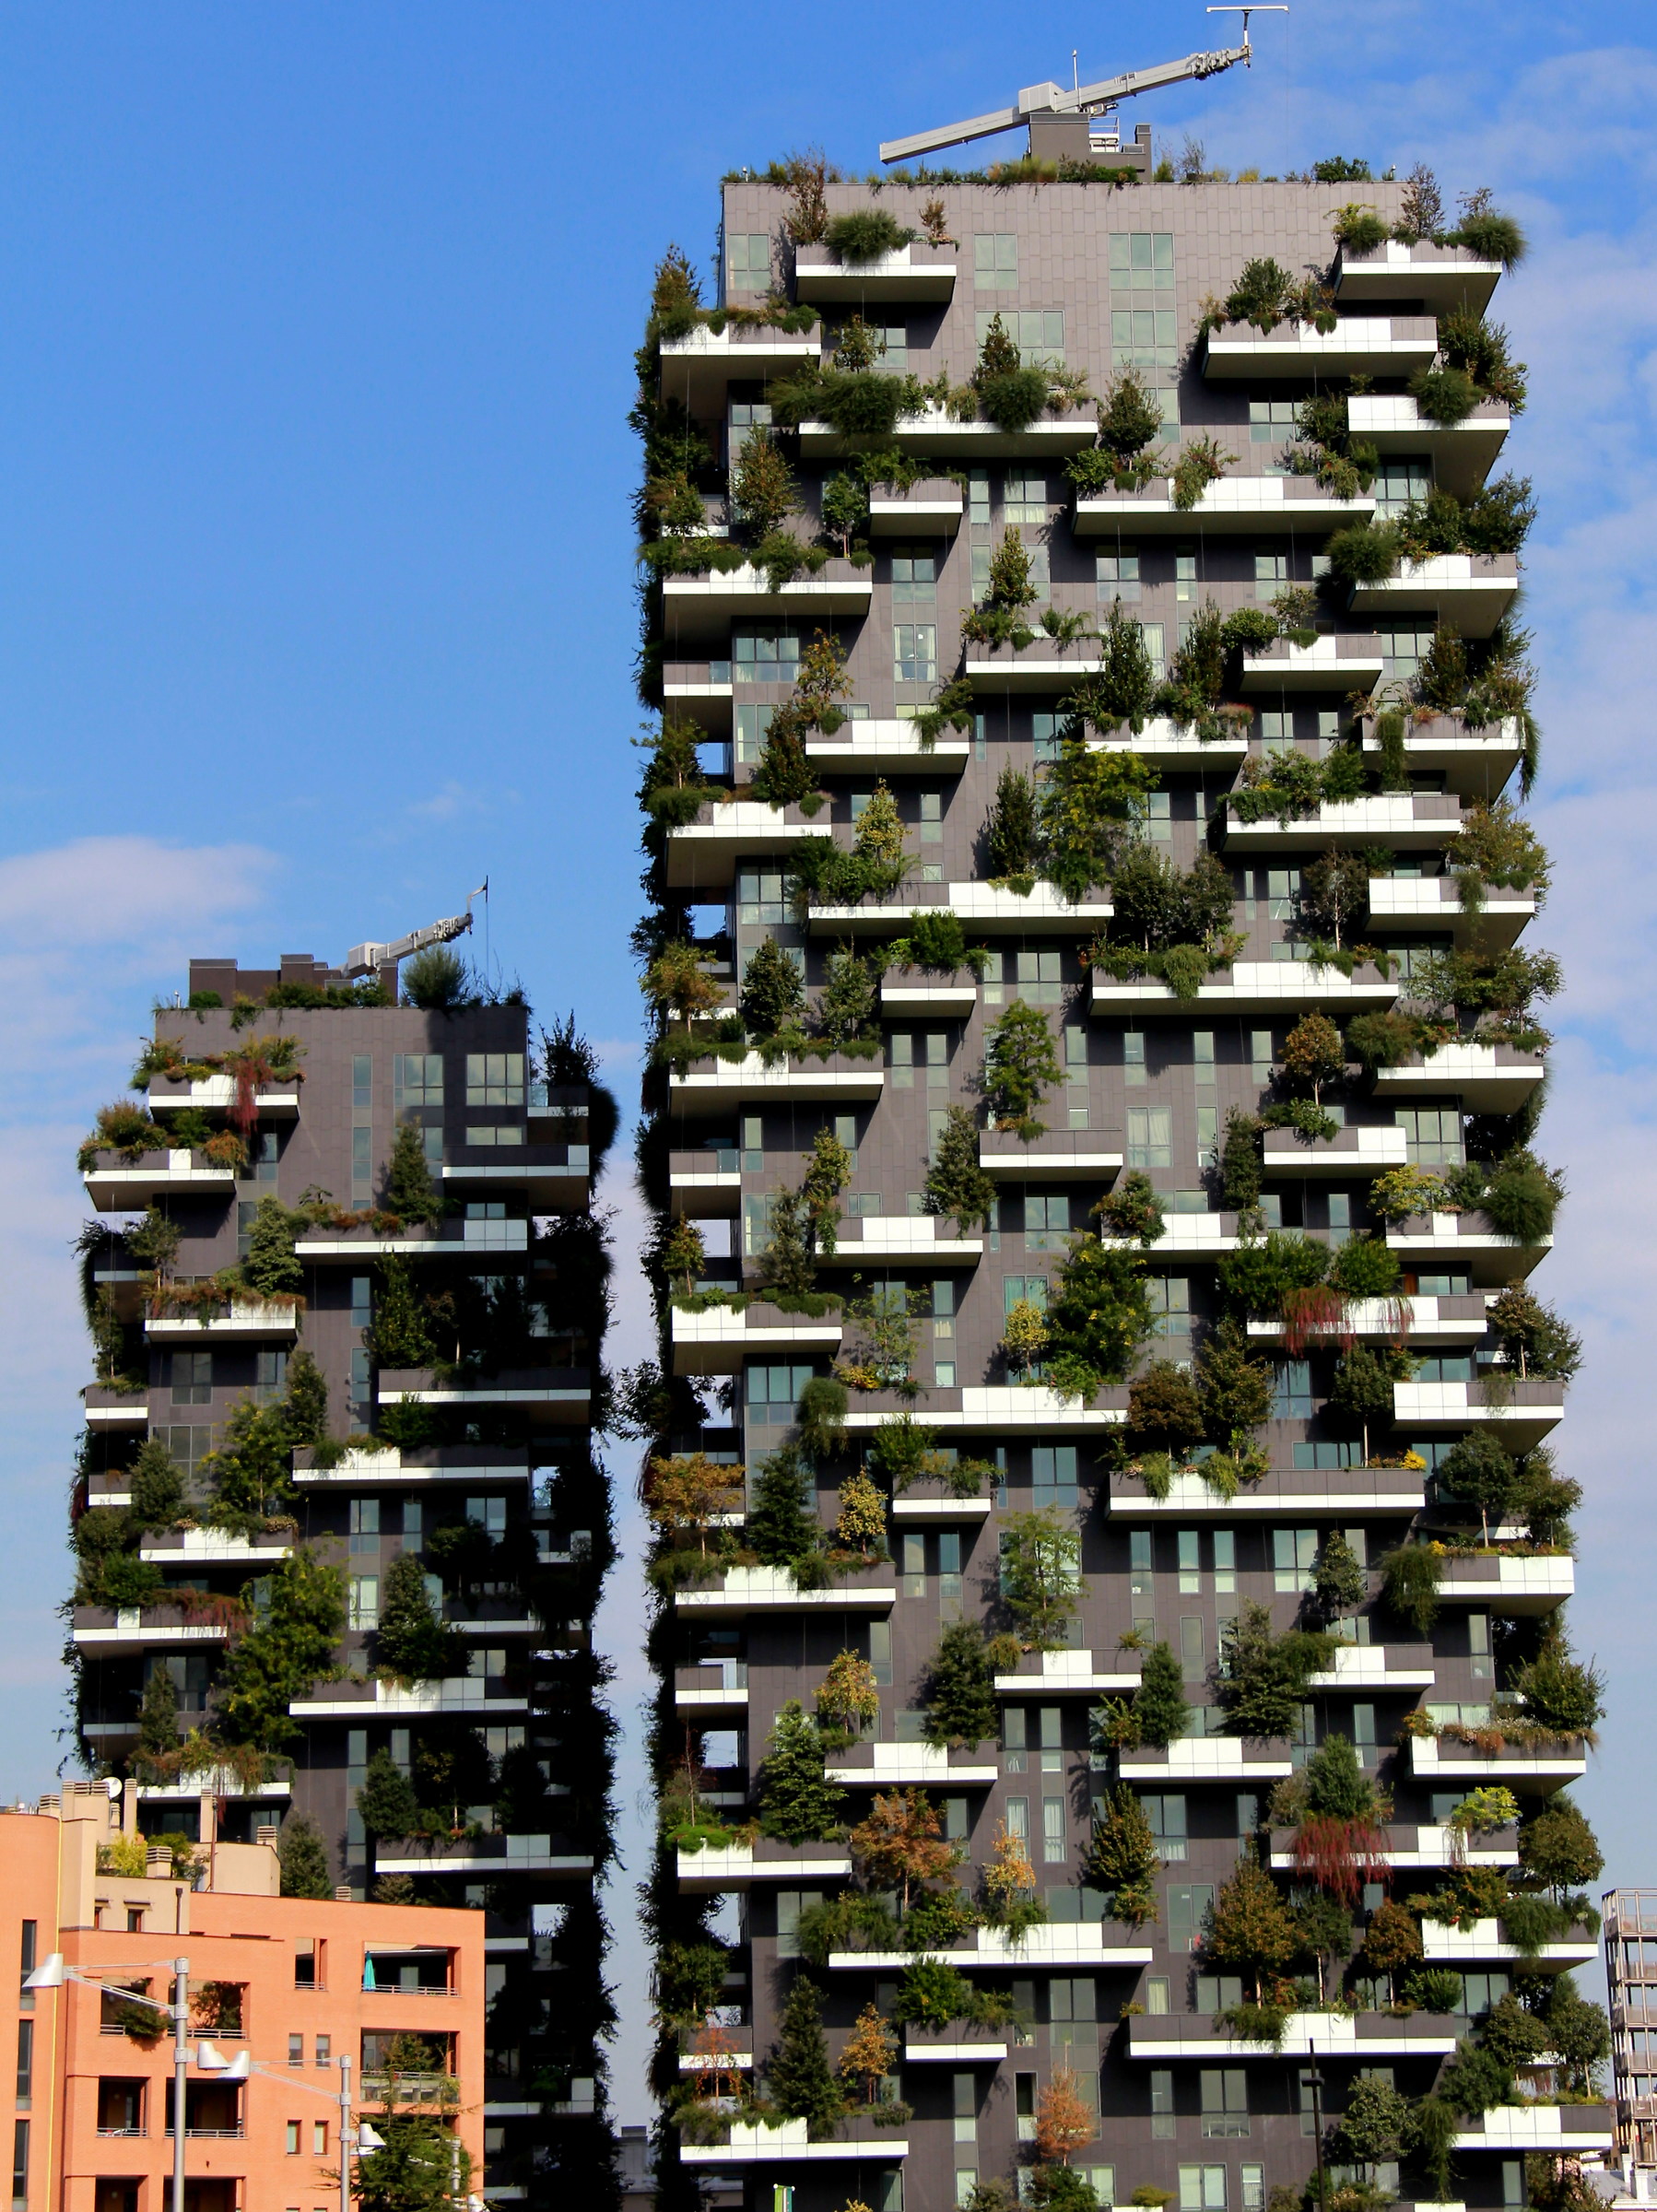 The vertical forest in the city...